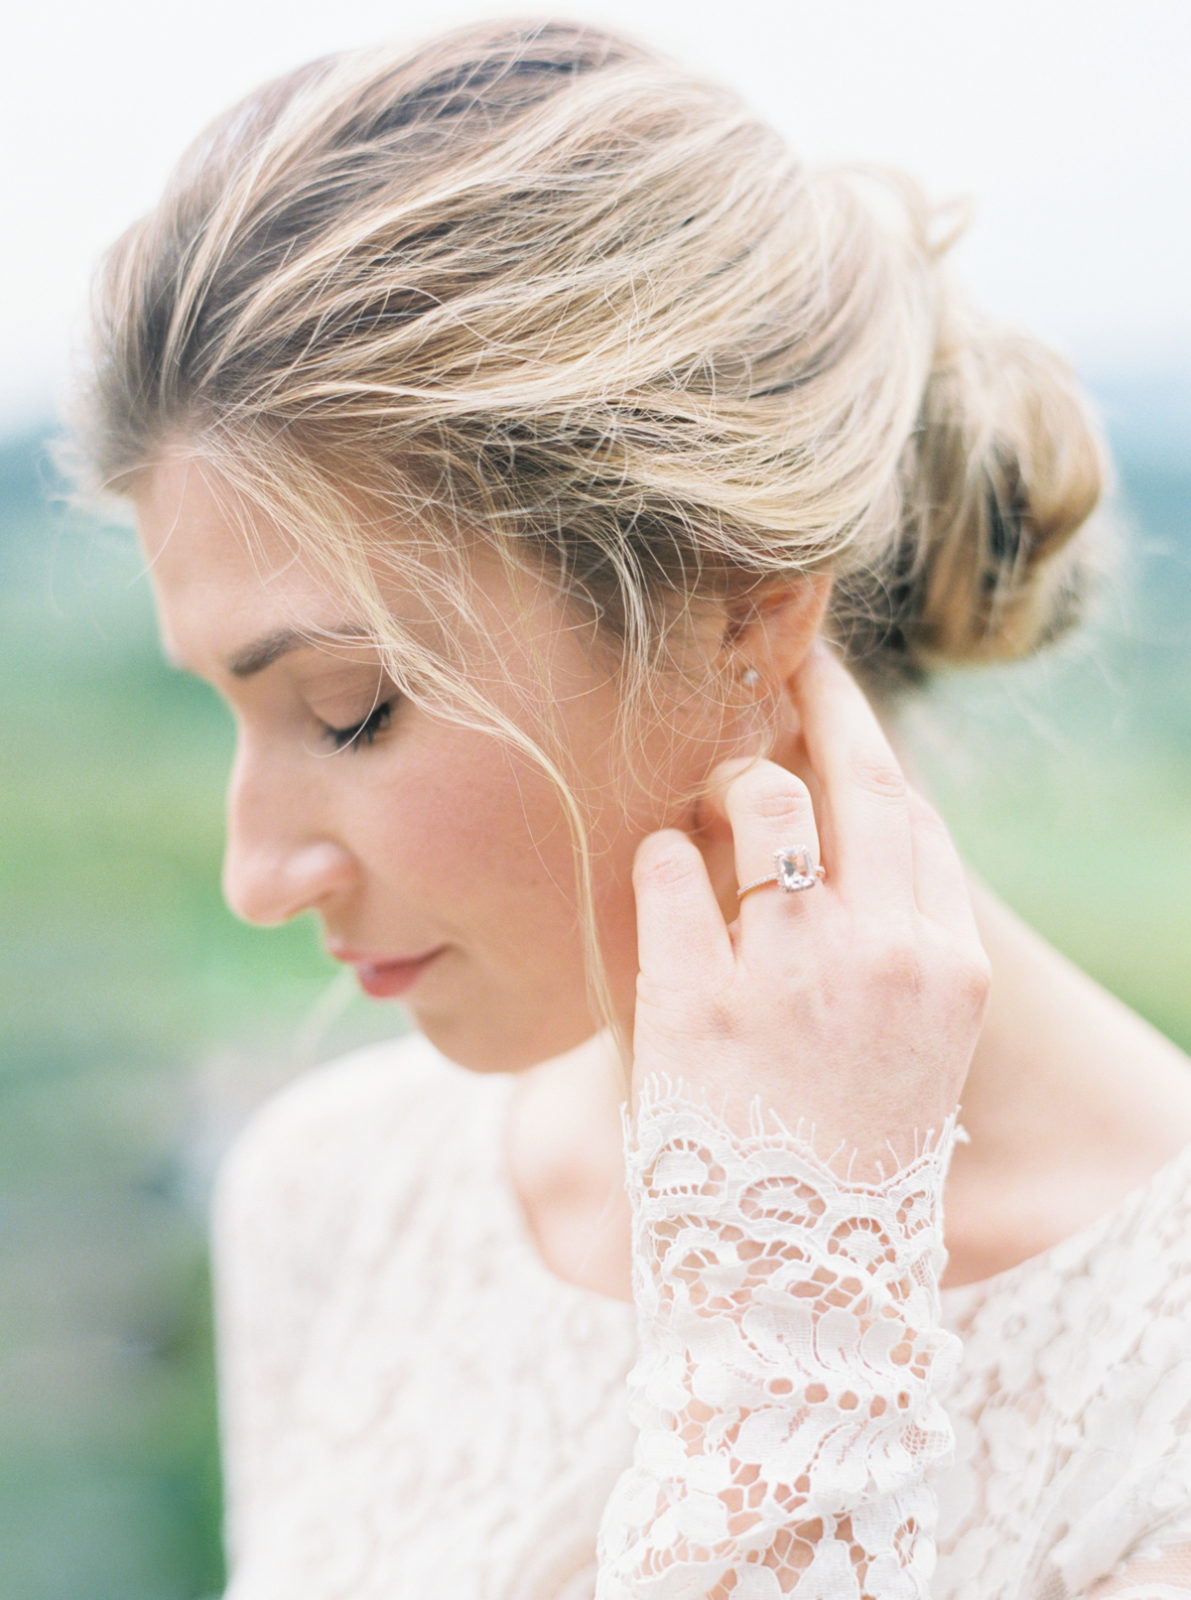 Romantic Bridal Hairstyles Photographed by Molly Carr Photography | Fine Art Bridal Hair and Makeup | Paris Wedding Photographer | Paris Film Photographer | France Destination Wedding | Pippin Hill Farm & Vineyard Wedding with Lauren Emerson Events